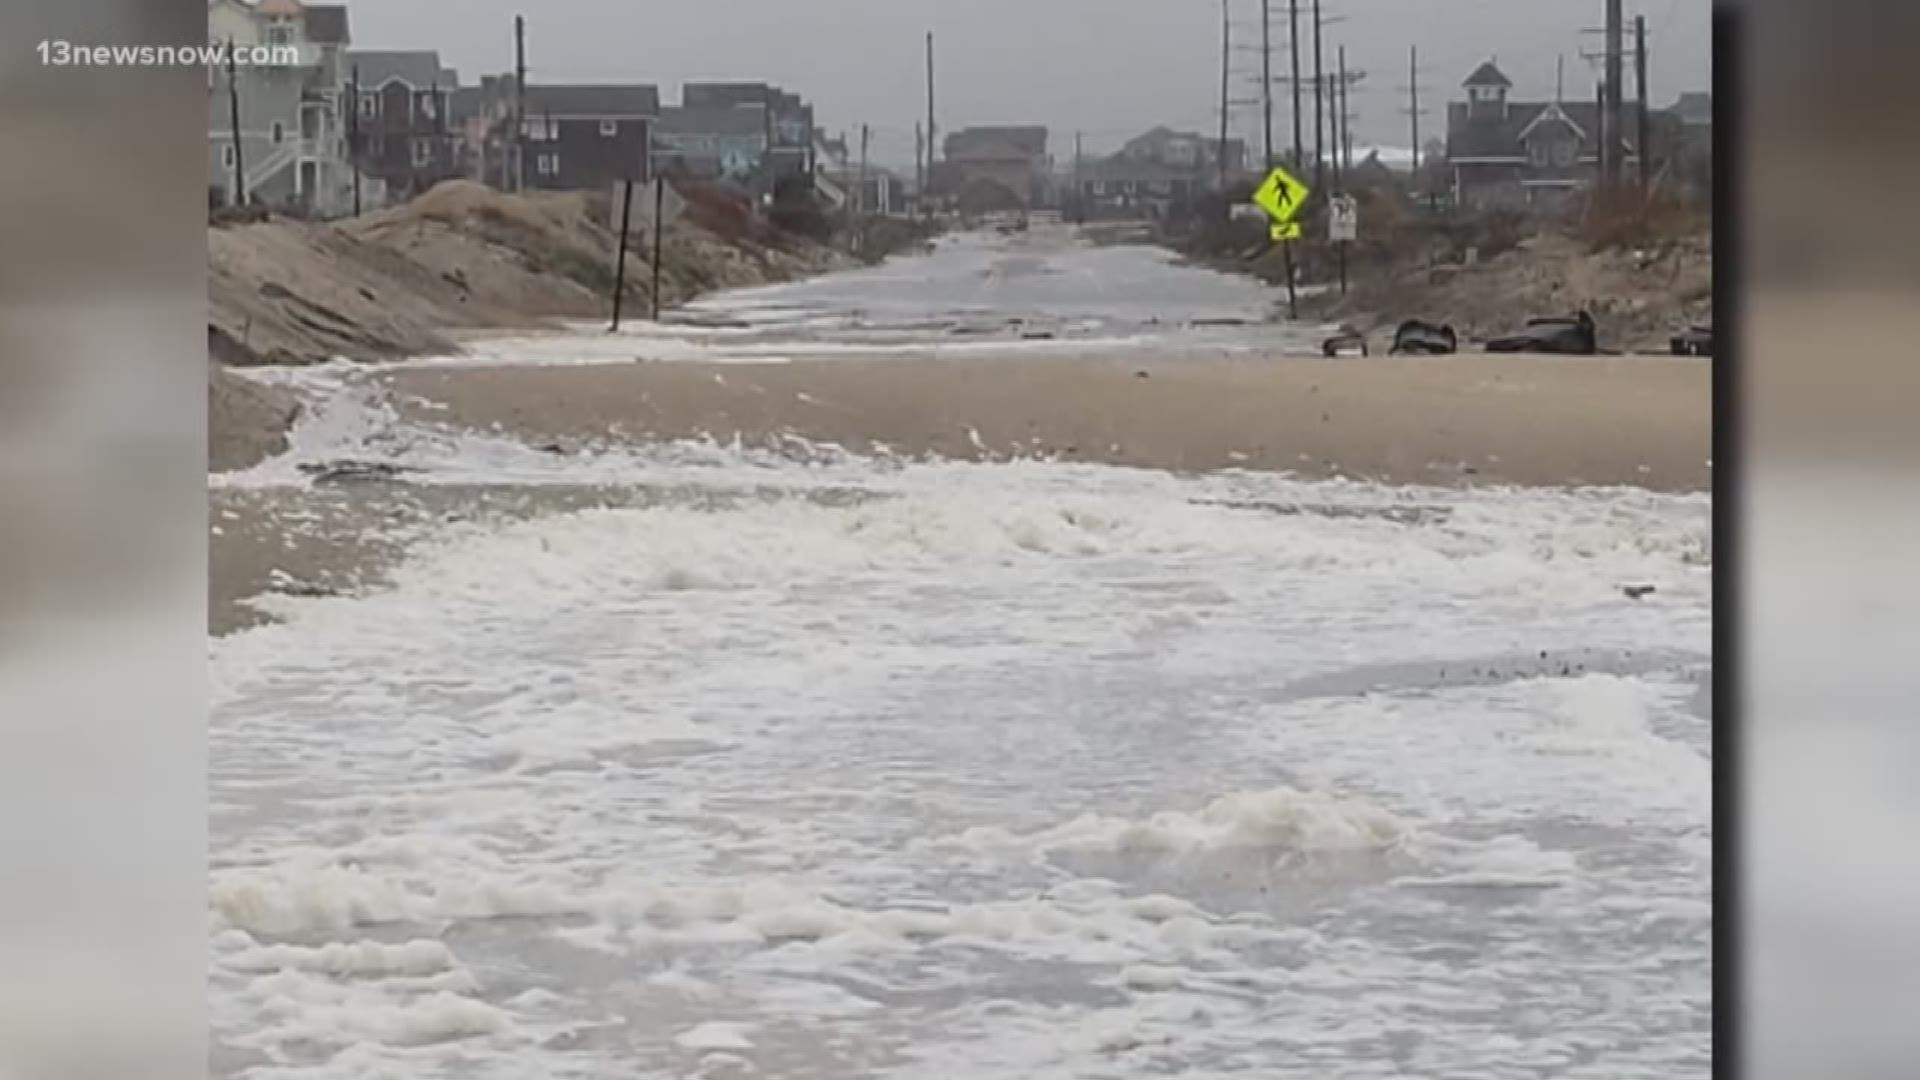 NCDOT officials said waves are still coming up over the sound dunes making NC-12 impassable and dangerous. The Nor'easter also knocked out power for many.